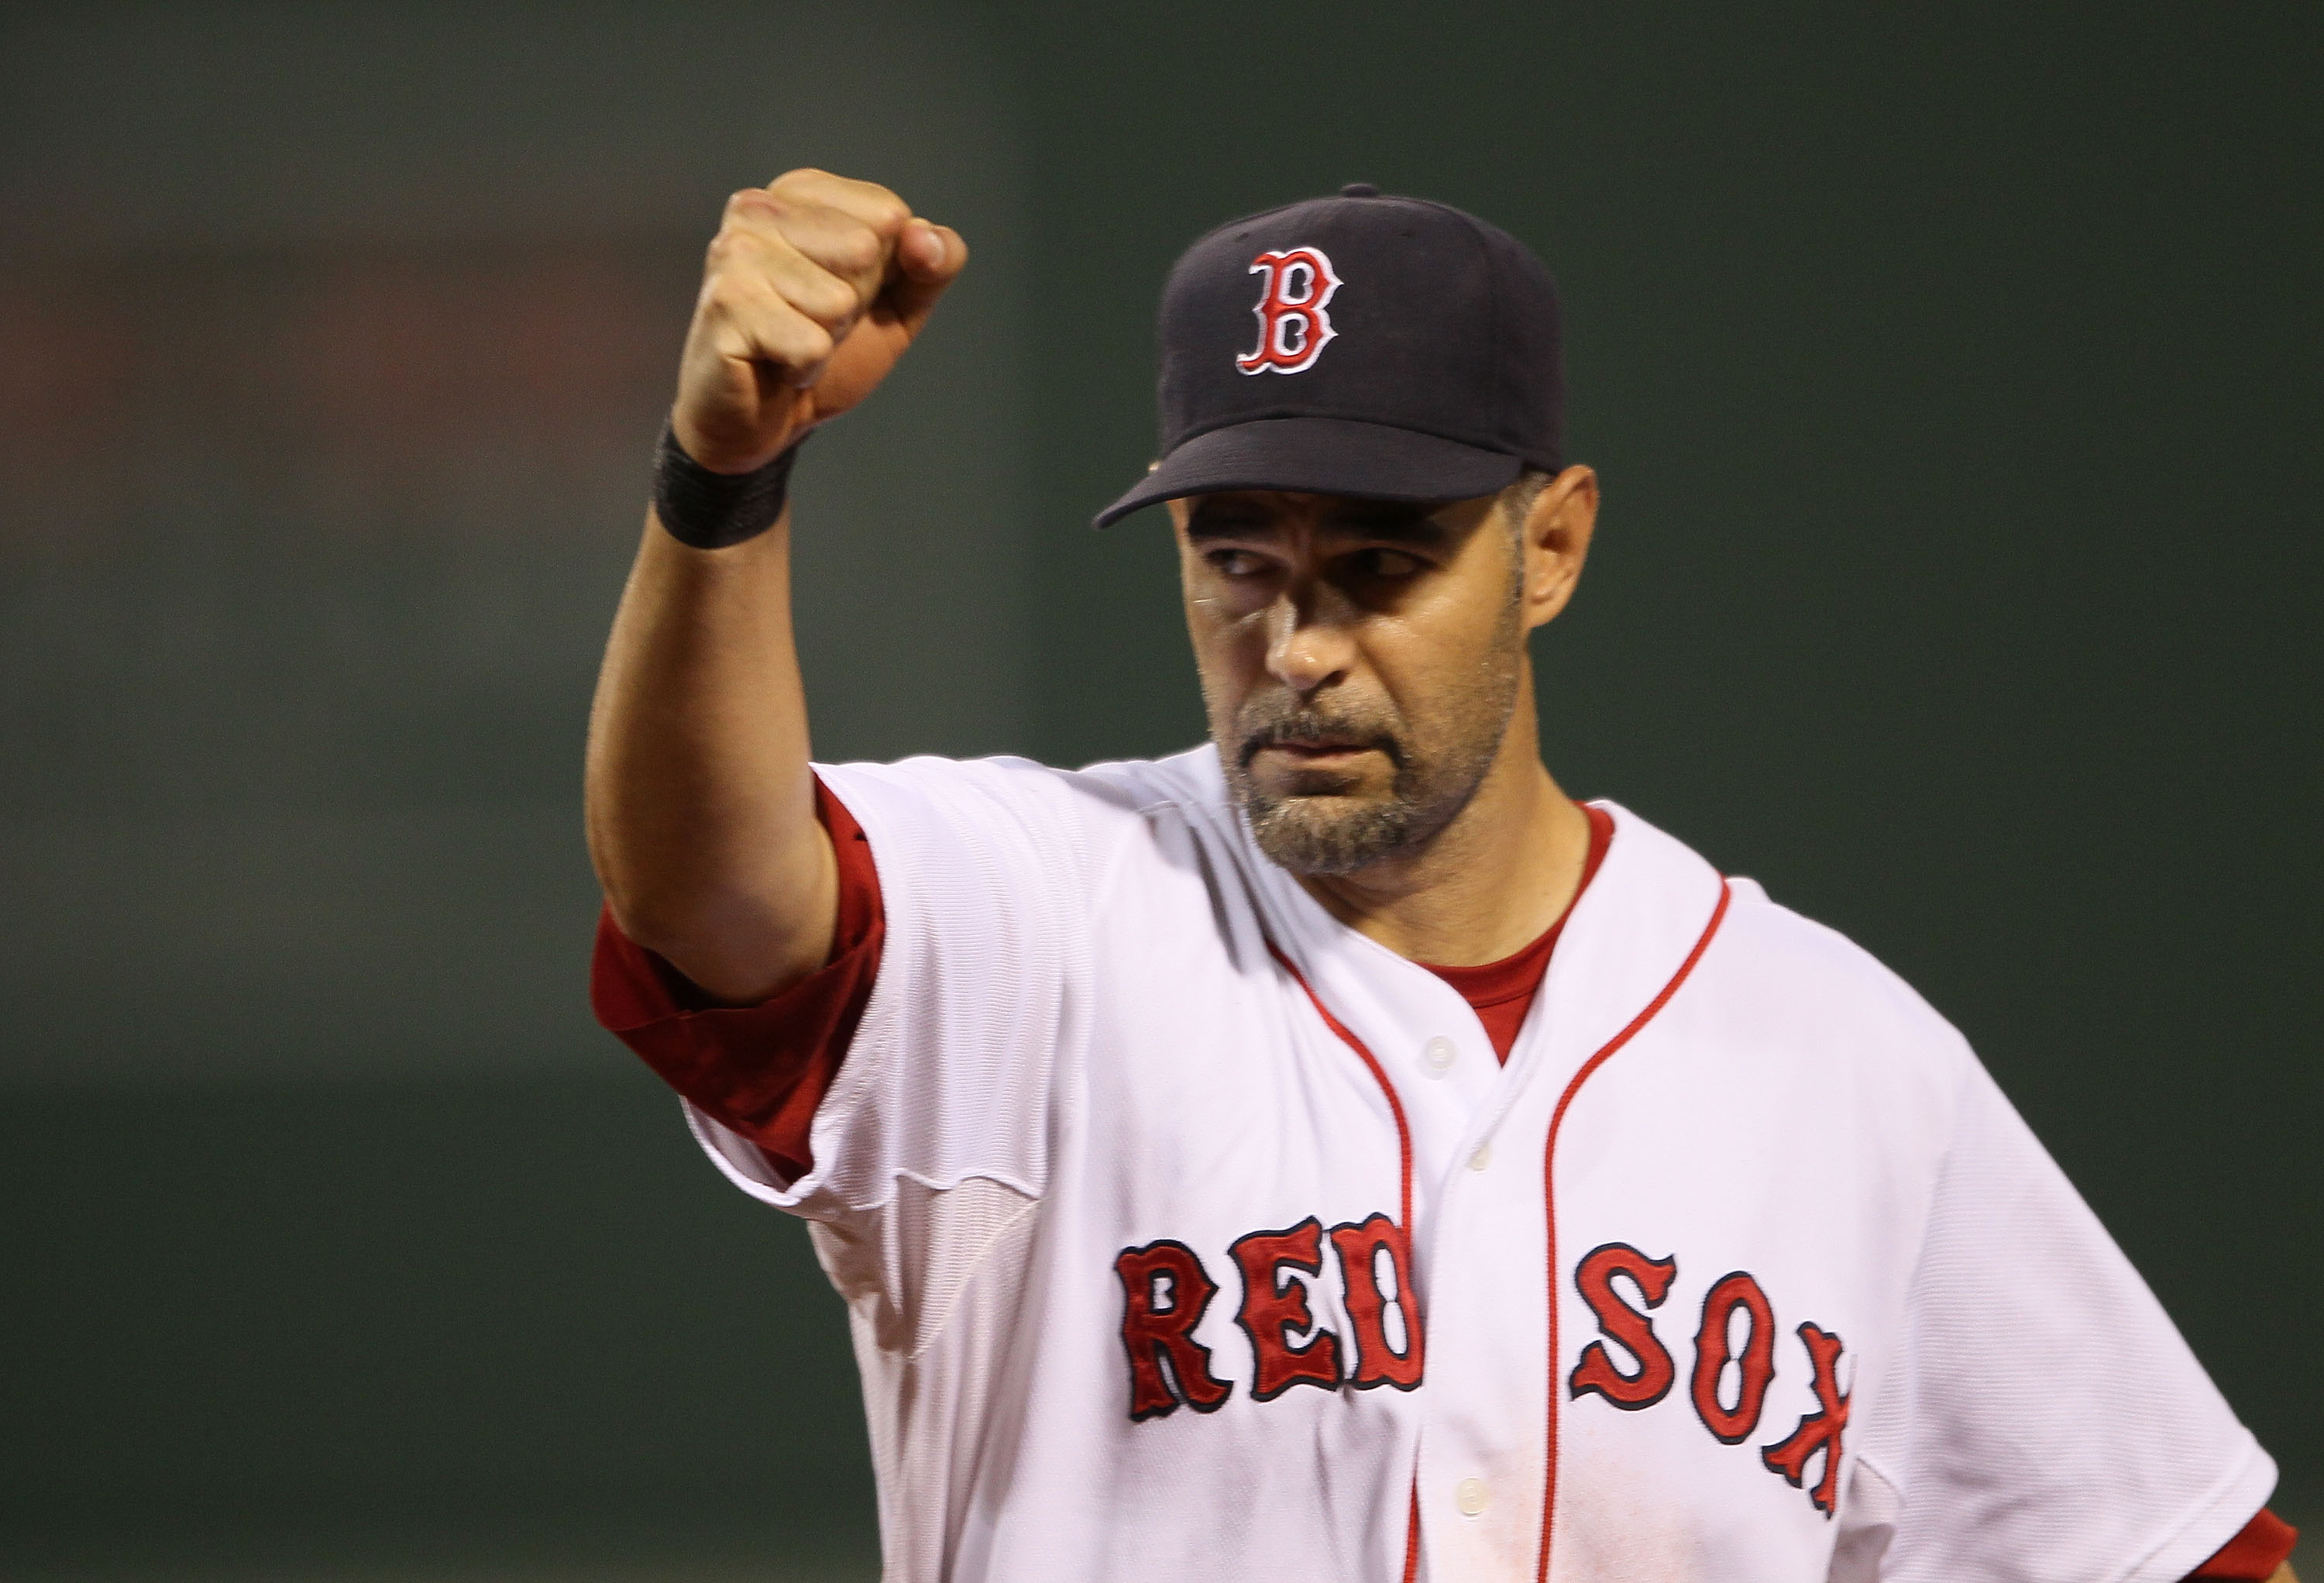 BOSTON - AUGUST 19:  Mike Lowell #25 of the Boston Red Sox celebrates as teammate J.D. Drew makes the catch for the final out of the third inning against the Los Angeles Angels of Anaheim on August 19, 2010 at Fenway Park in Boston, Massachusetts.  (Photo